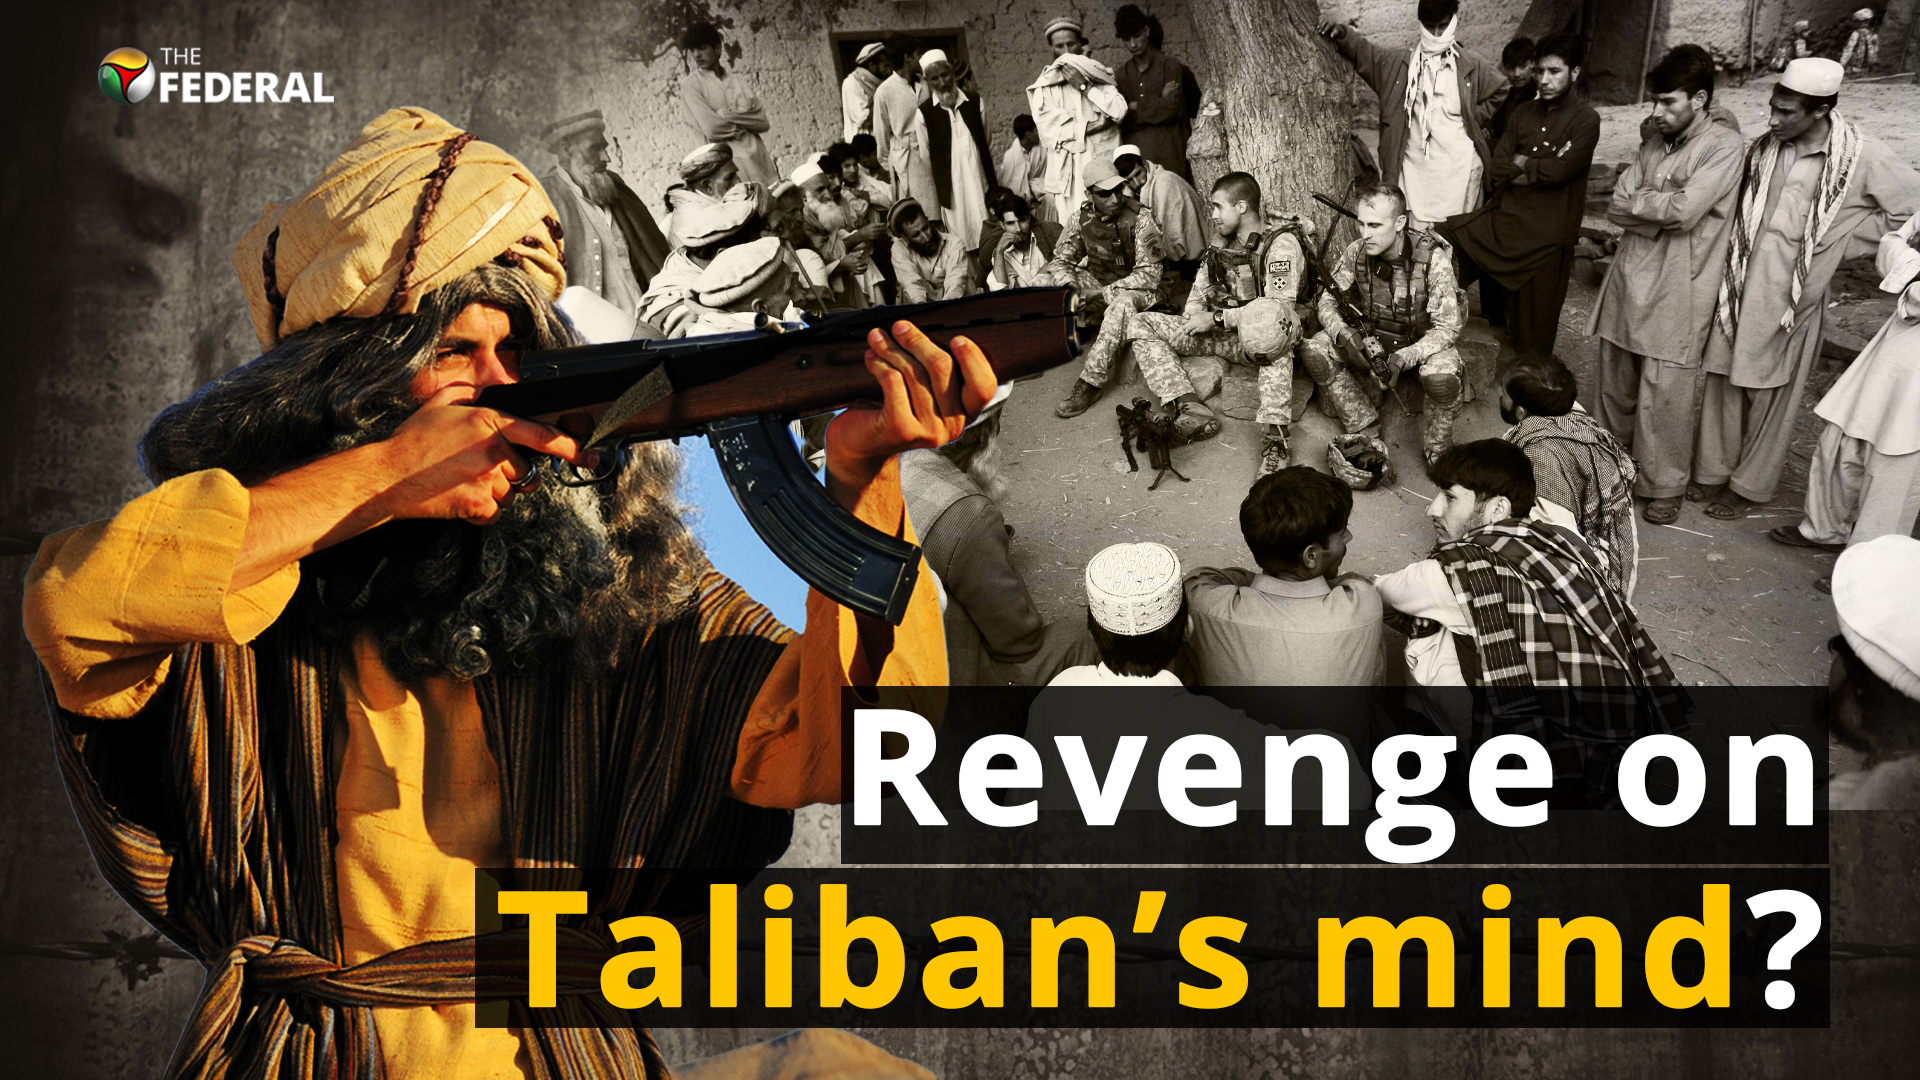 What happens to those who helped foreign powers against Taliban?